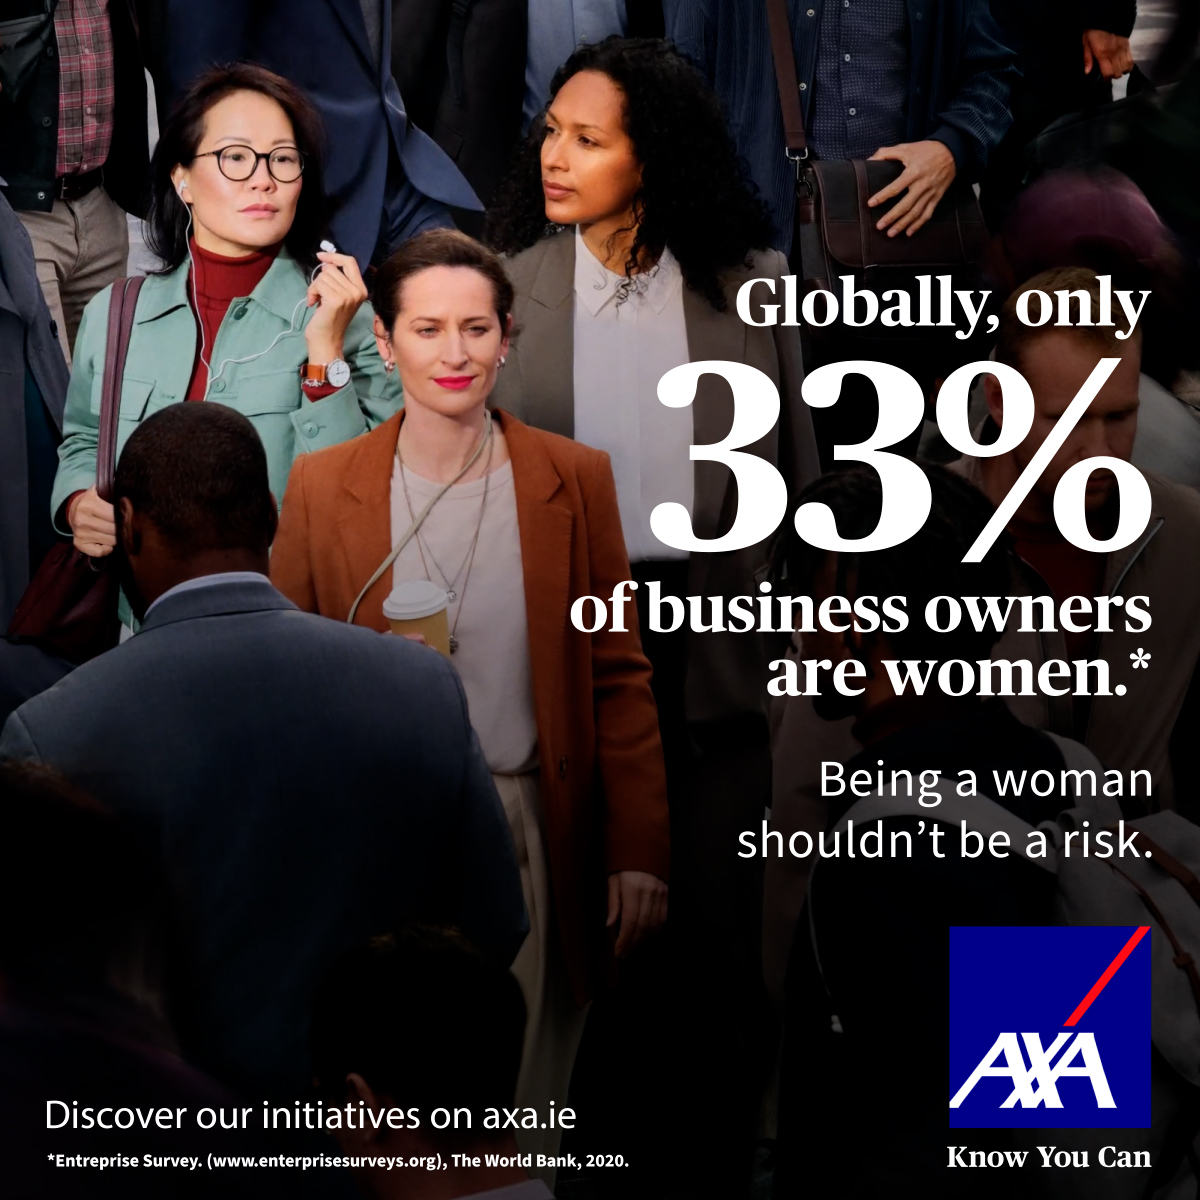 Globally, only 33% of Business Owners are Women. Being a woman shouldn't be a risk That's why AXA is involved in initiatives to help women's professional and economic empowerment. Discover our global and local initiatives. axa.ie